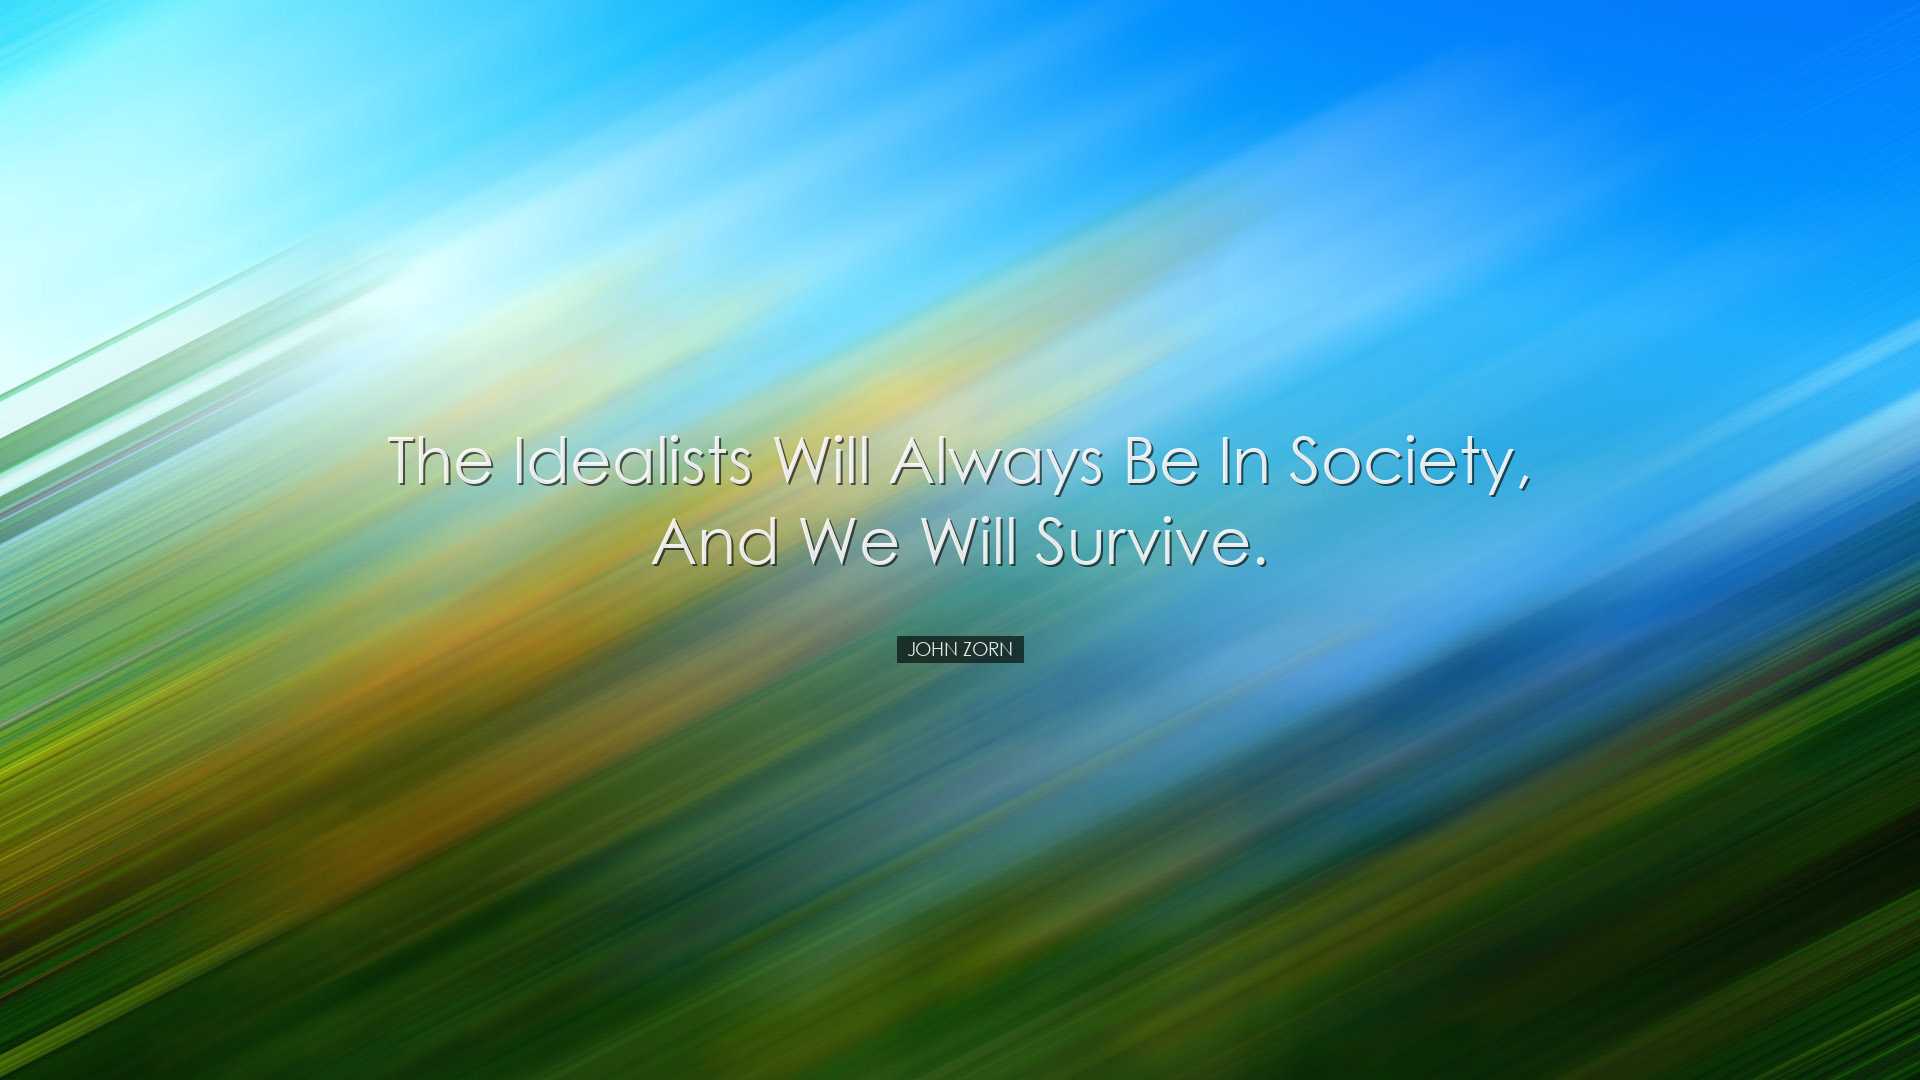 The idealists will always be in society, and we will survive. - Jo